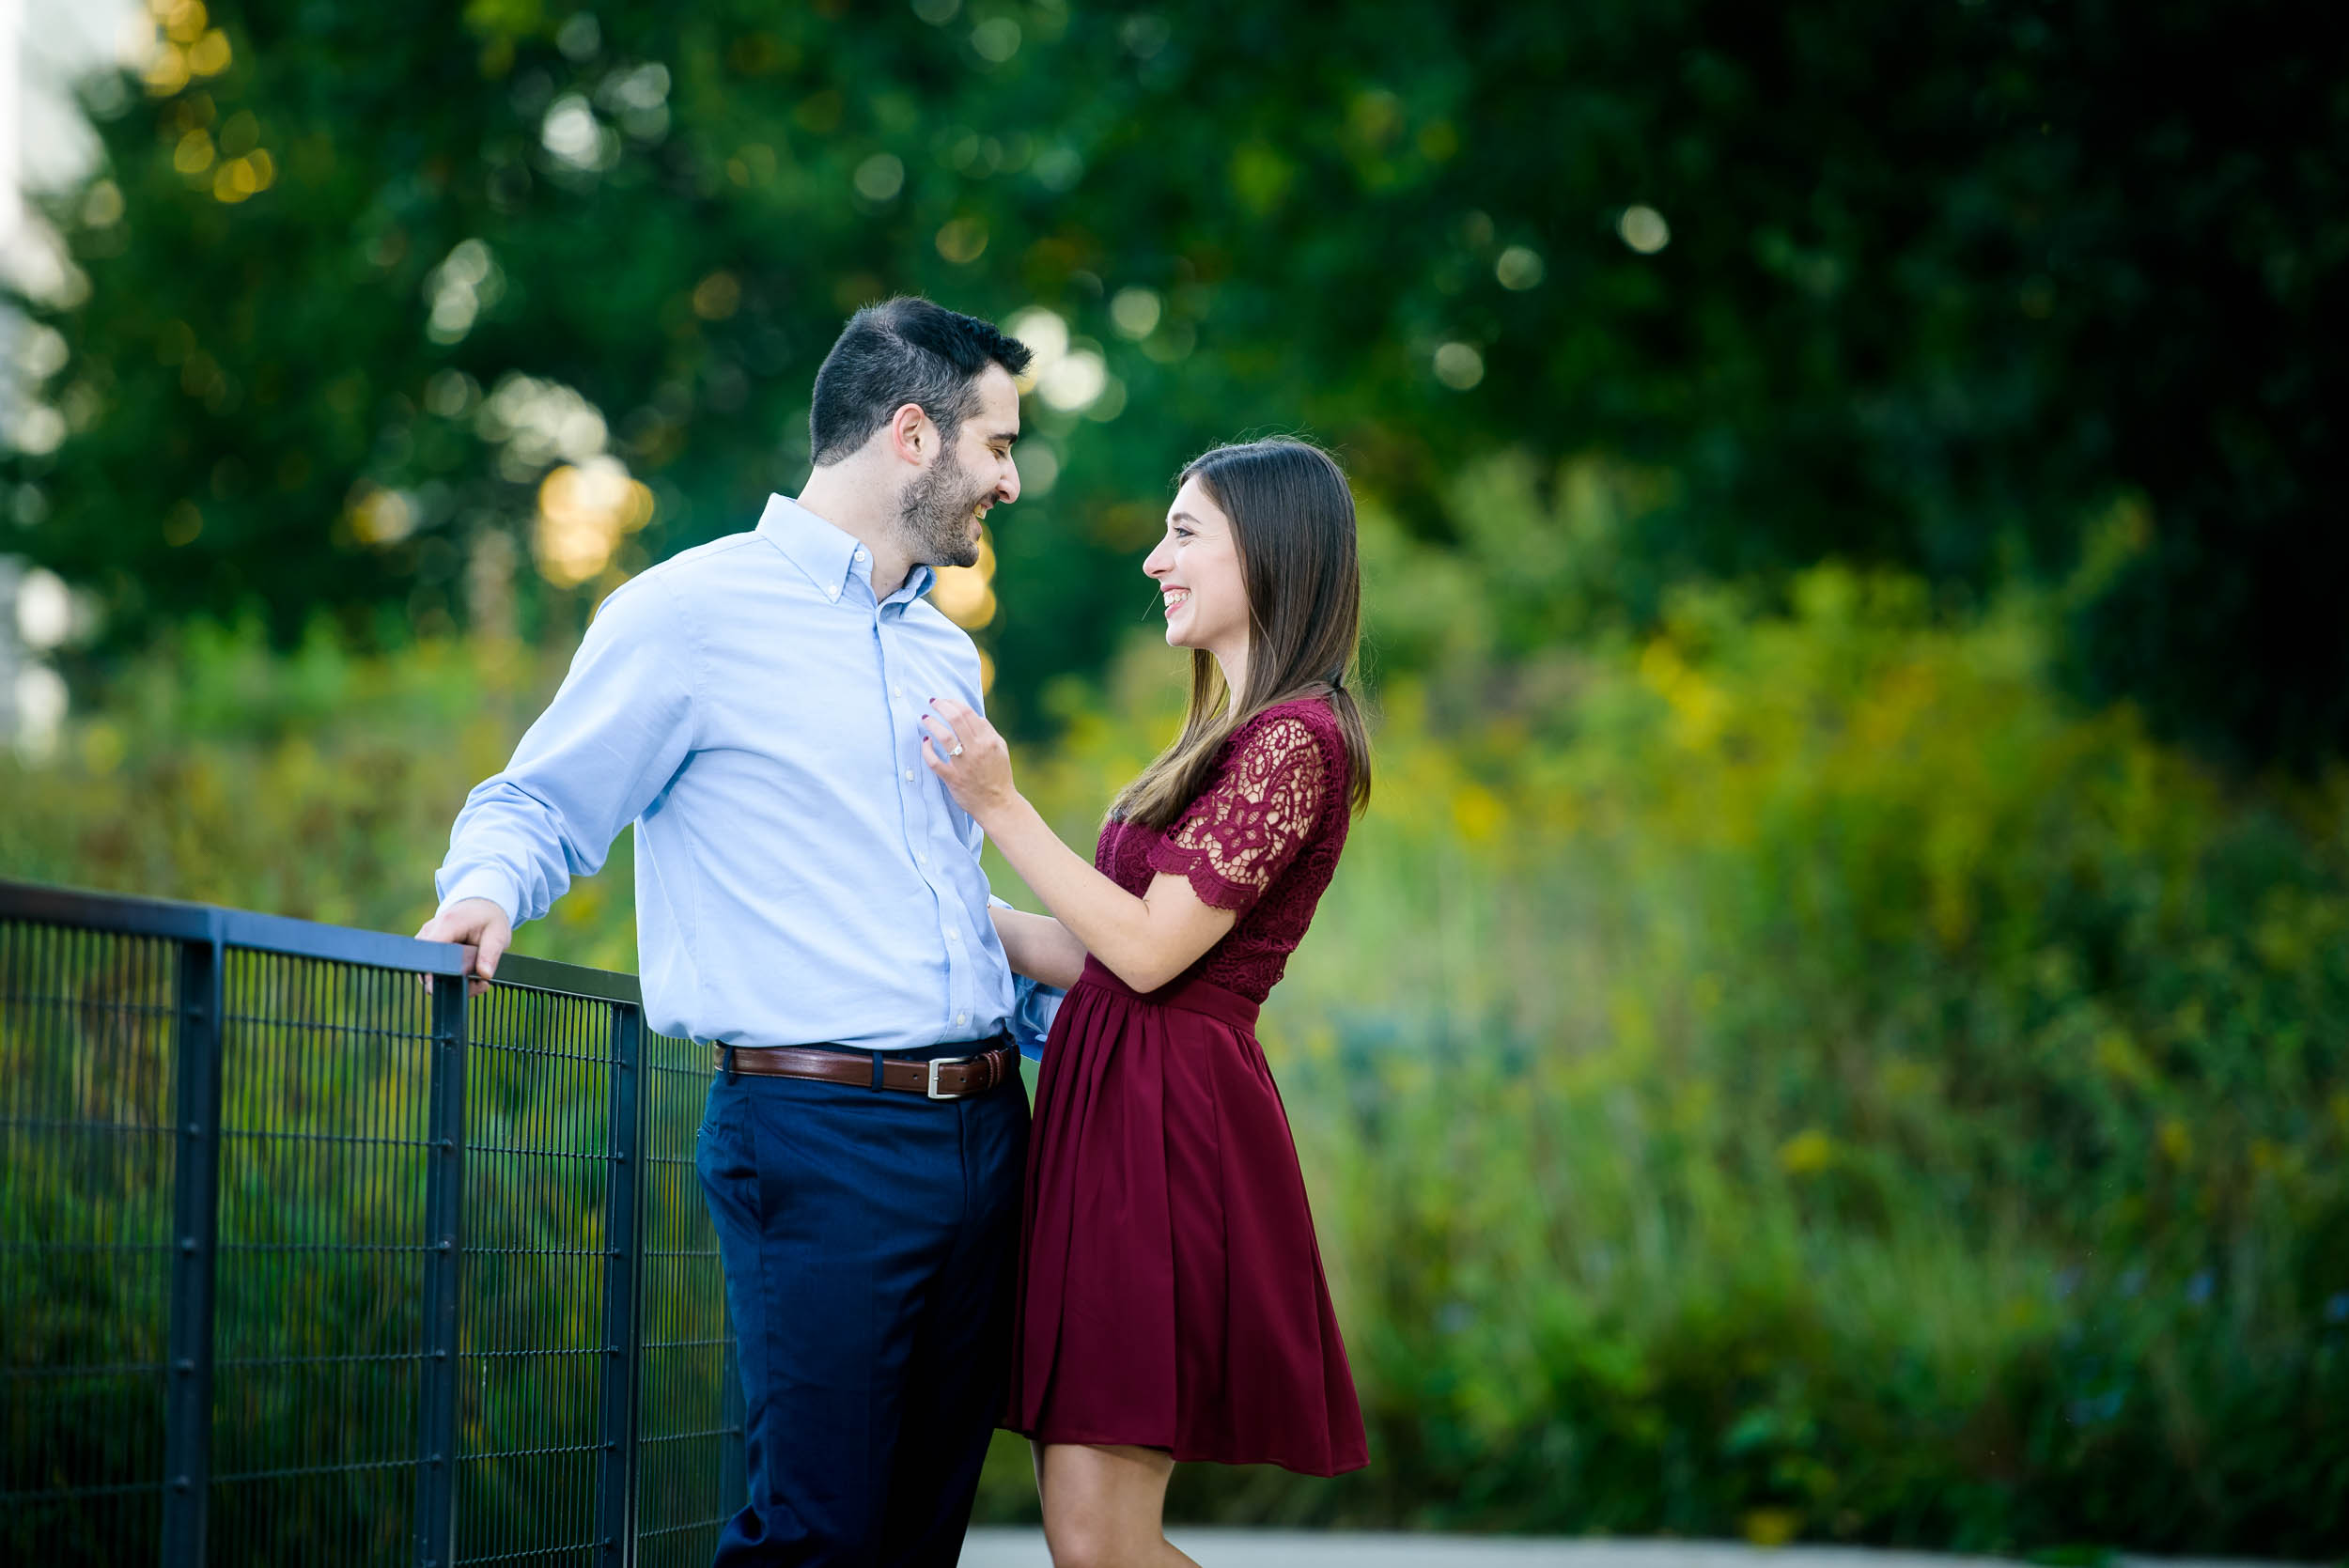 Copy of Lincoln Park Chicago engagement session captured by J. Brown Photography. See more engagement photo ideas at jbrownphotography.com!